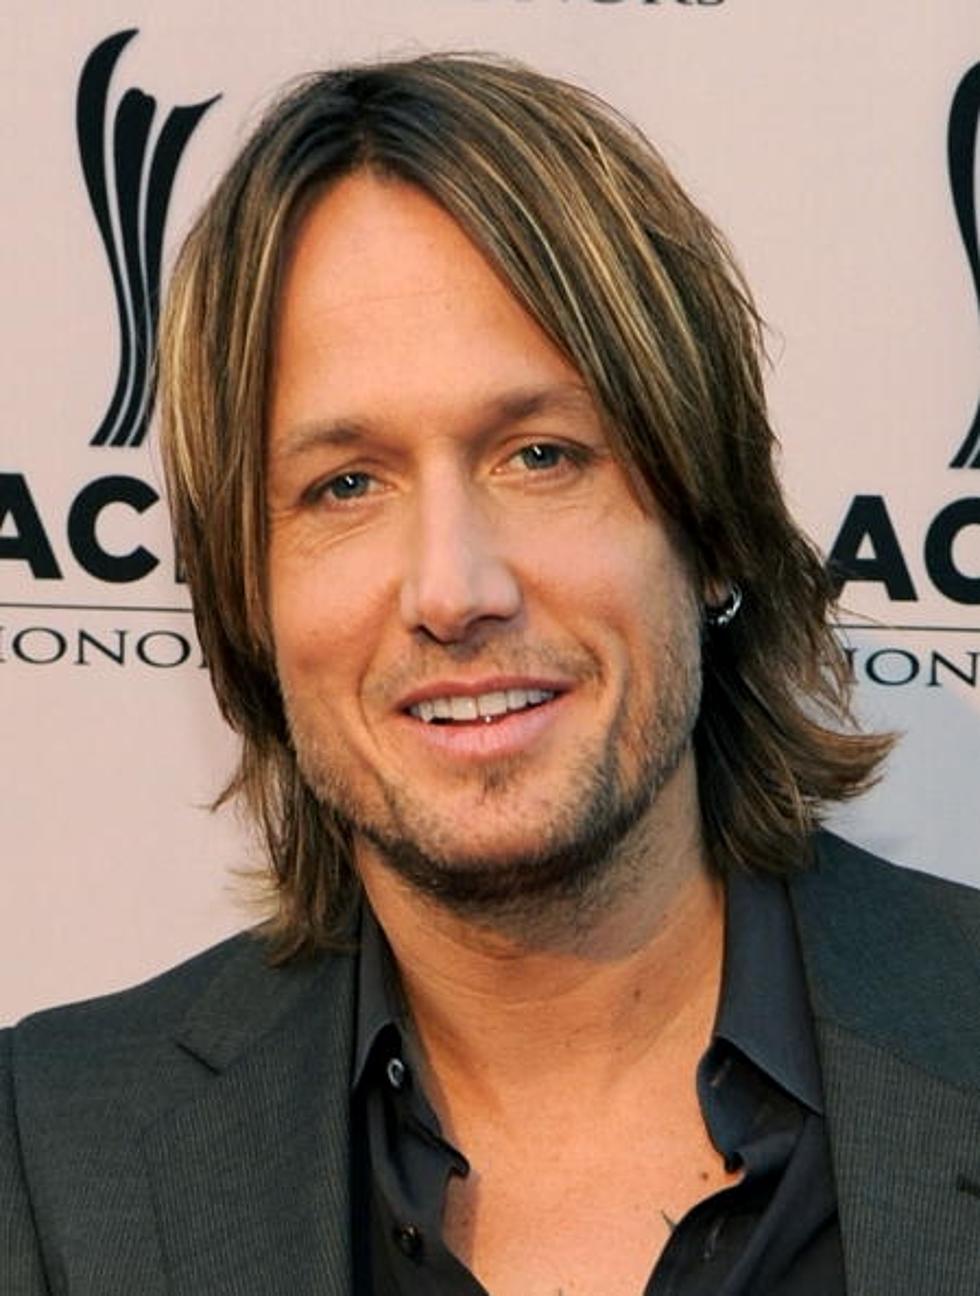 Keith Urban to Perform for Super Bowl Pre-game Show